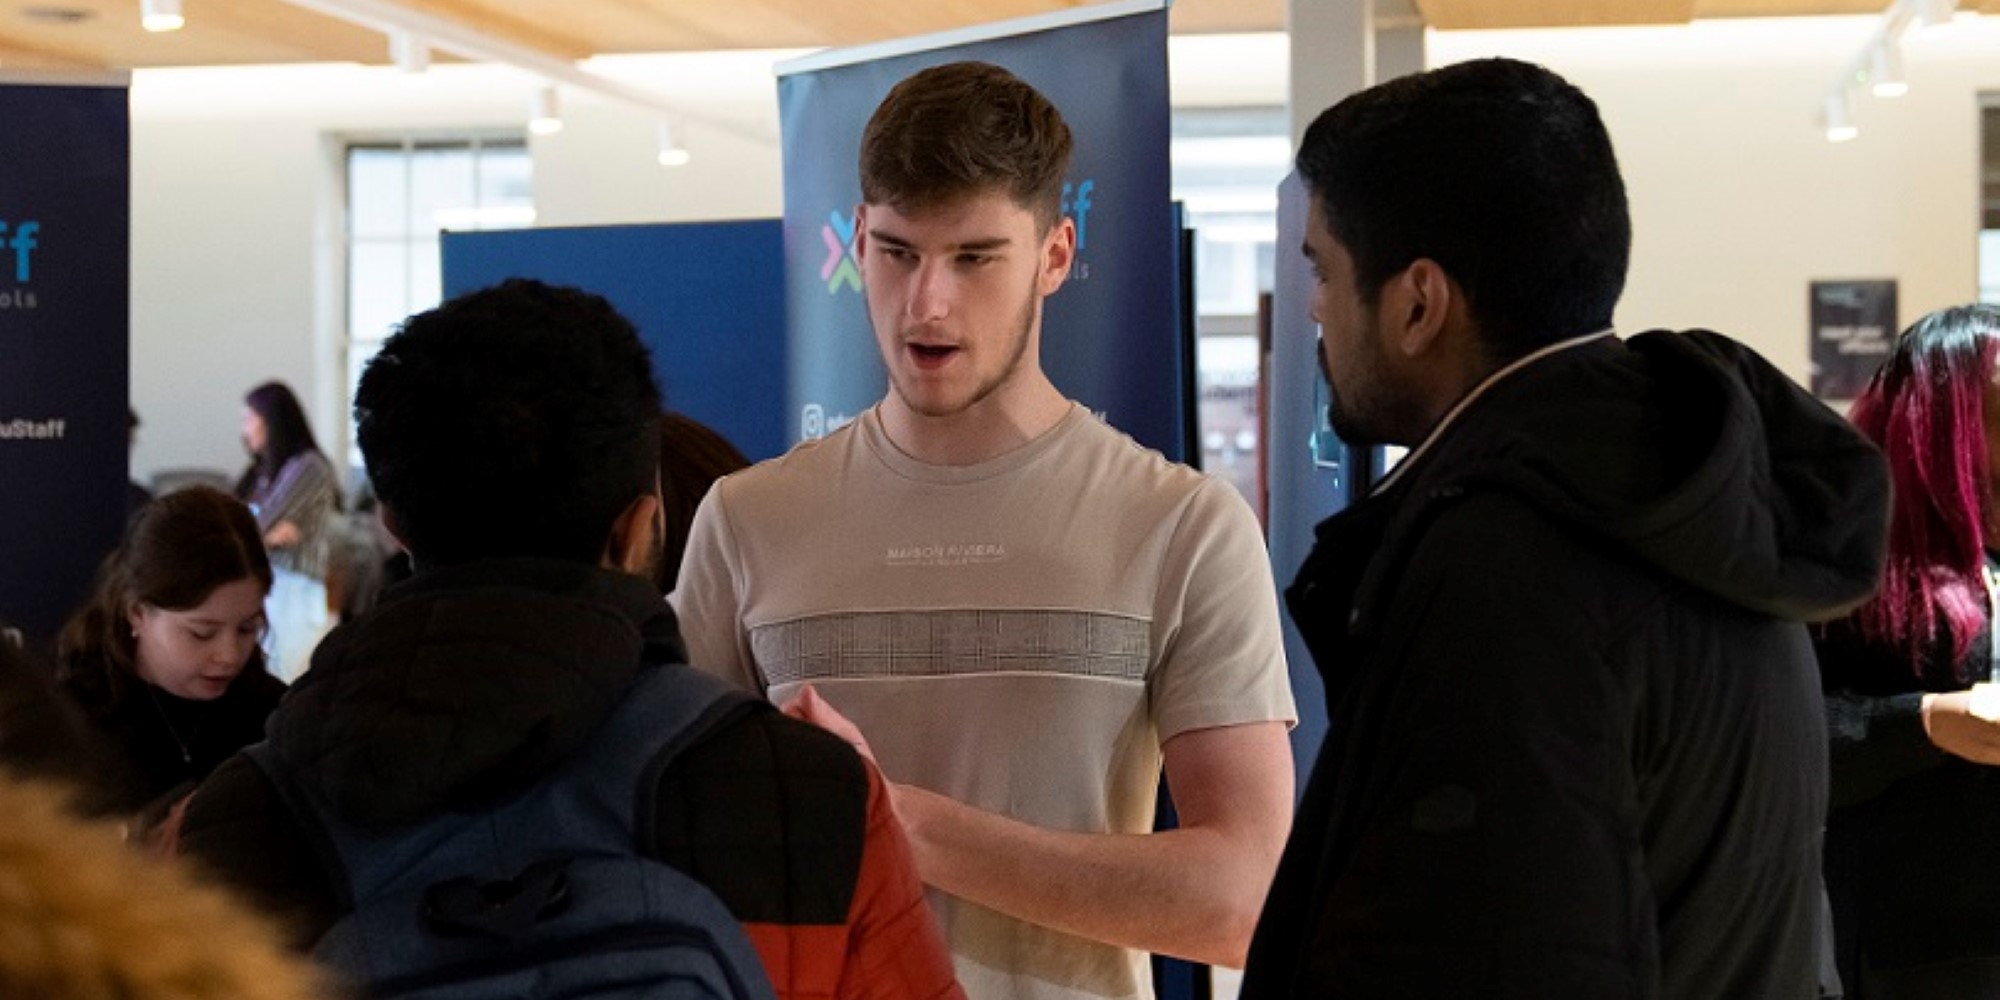 An image of a student networking at a Careers Fair.